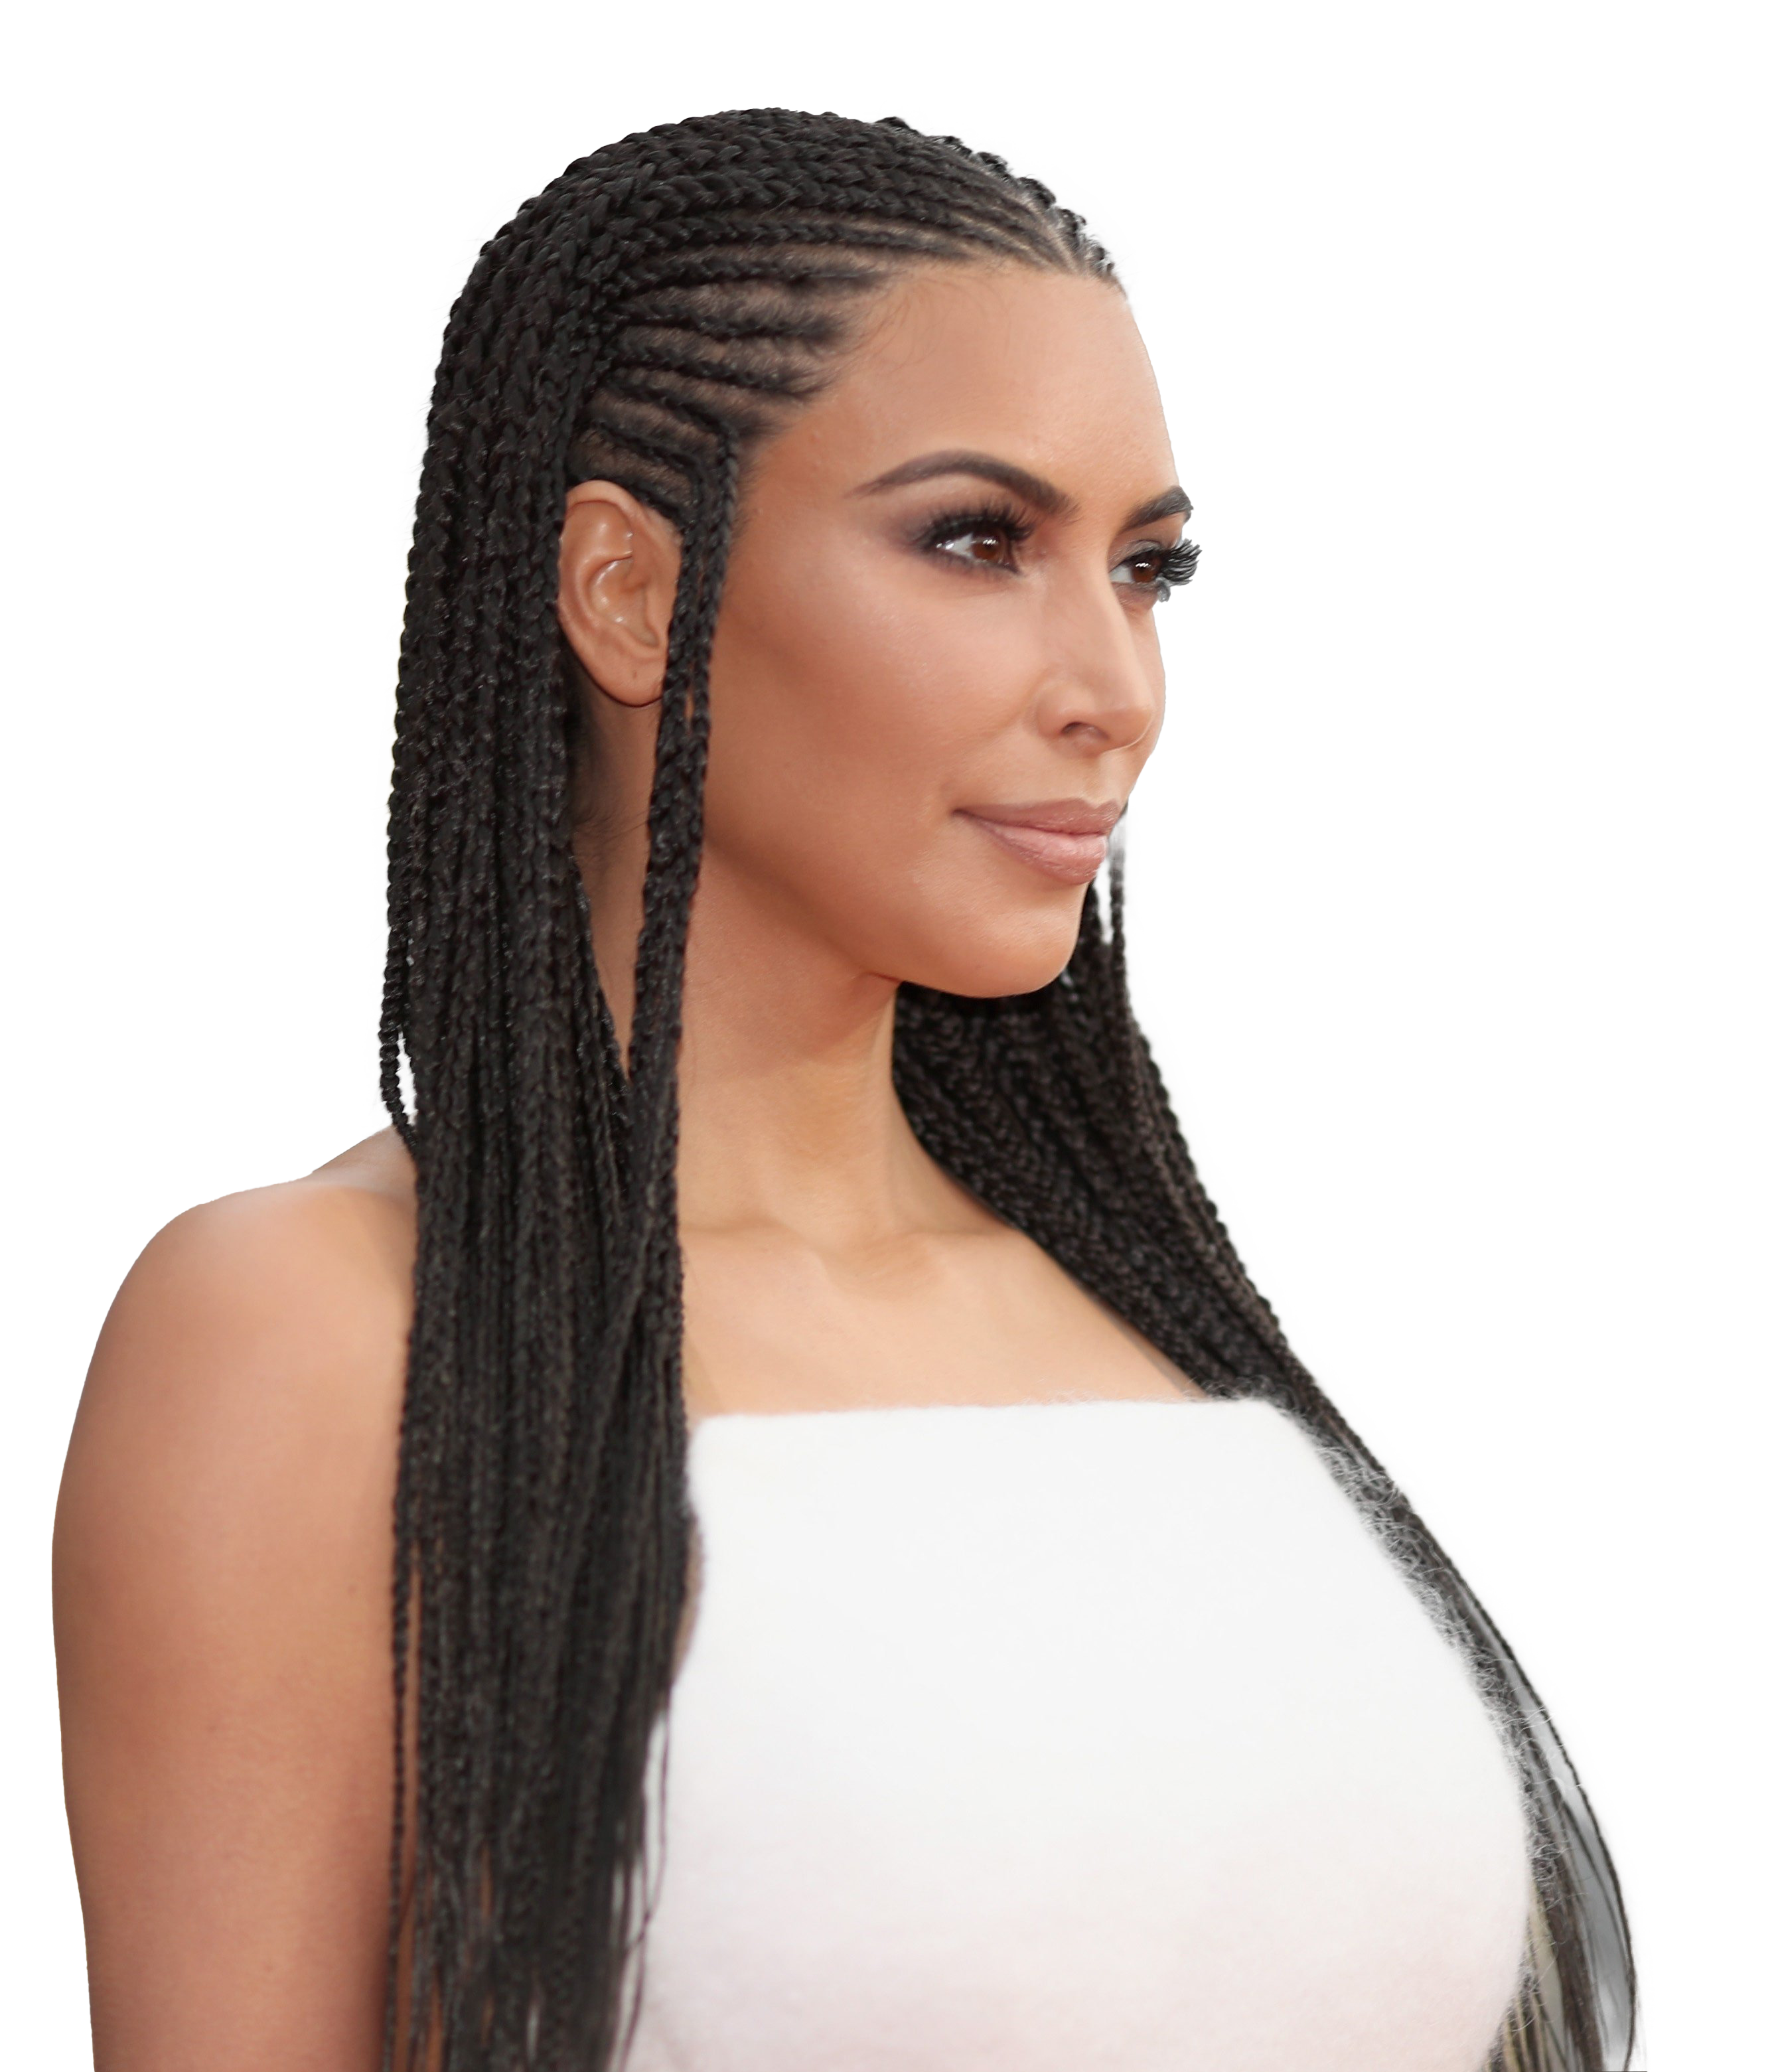 Hairstyle Pic Braids PNG File HD PNG Image